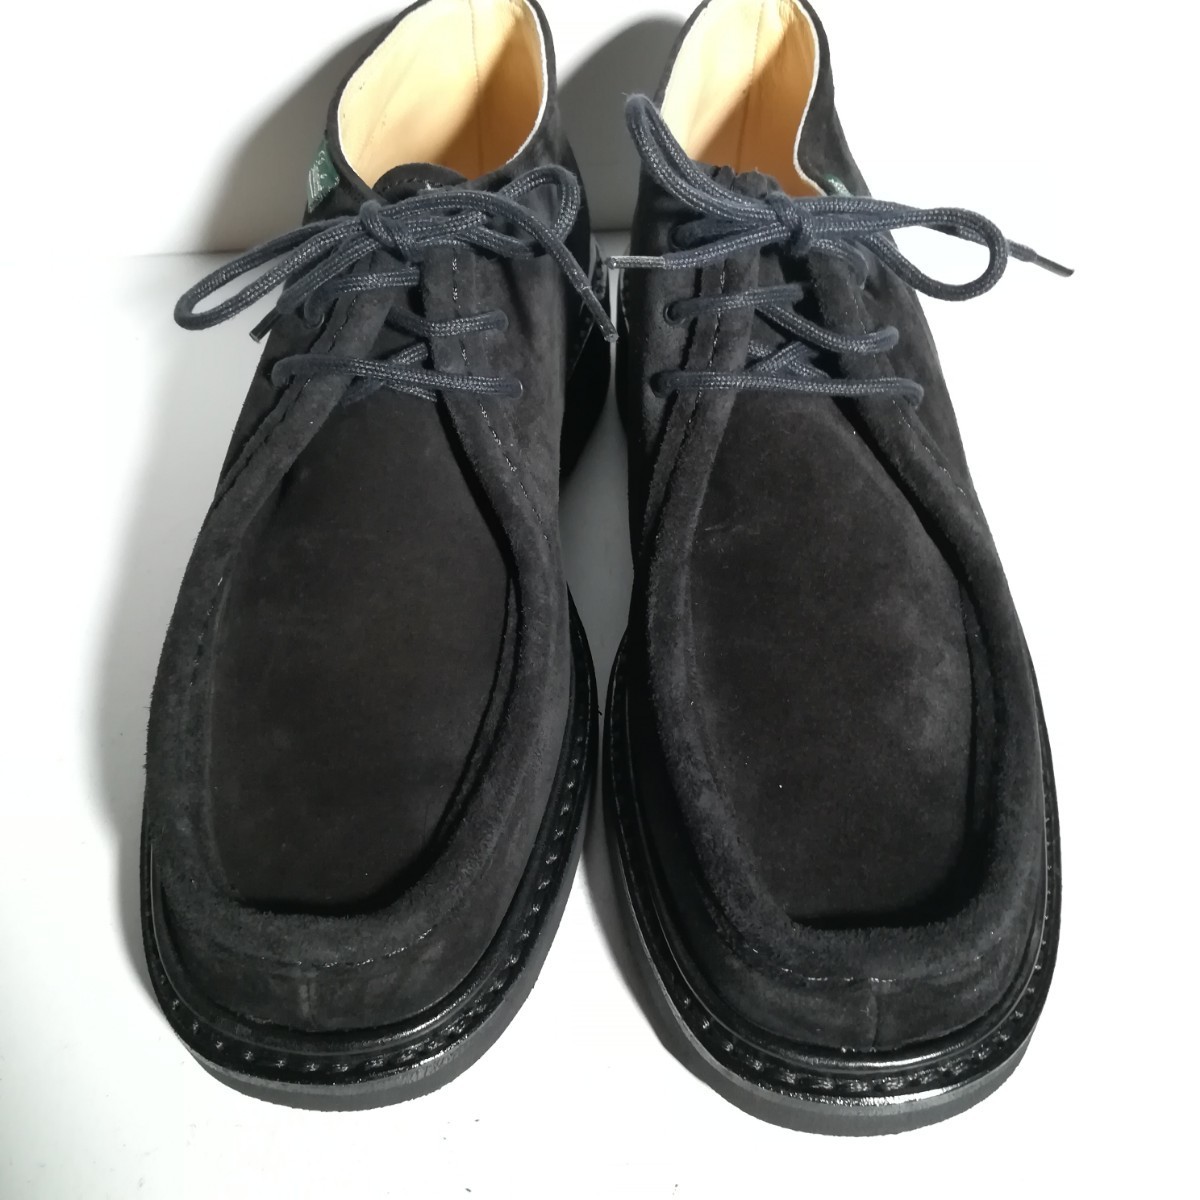 4111 unused . close * Paraboot Paraboot* suede boots 8 black shoes casual high class leather shoes gentleman shoes original leather tyrolean 